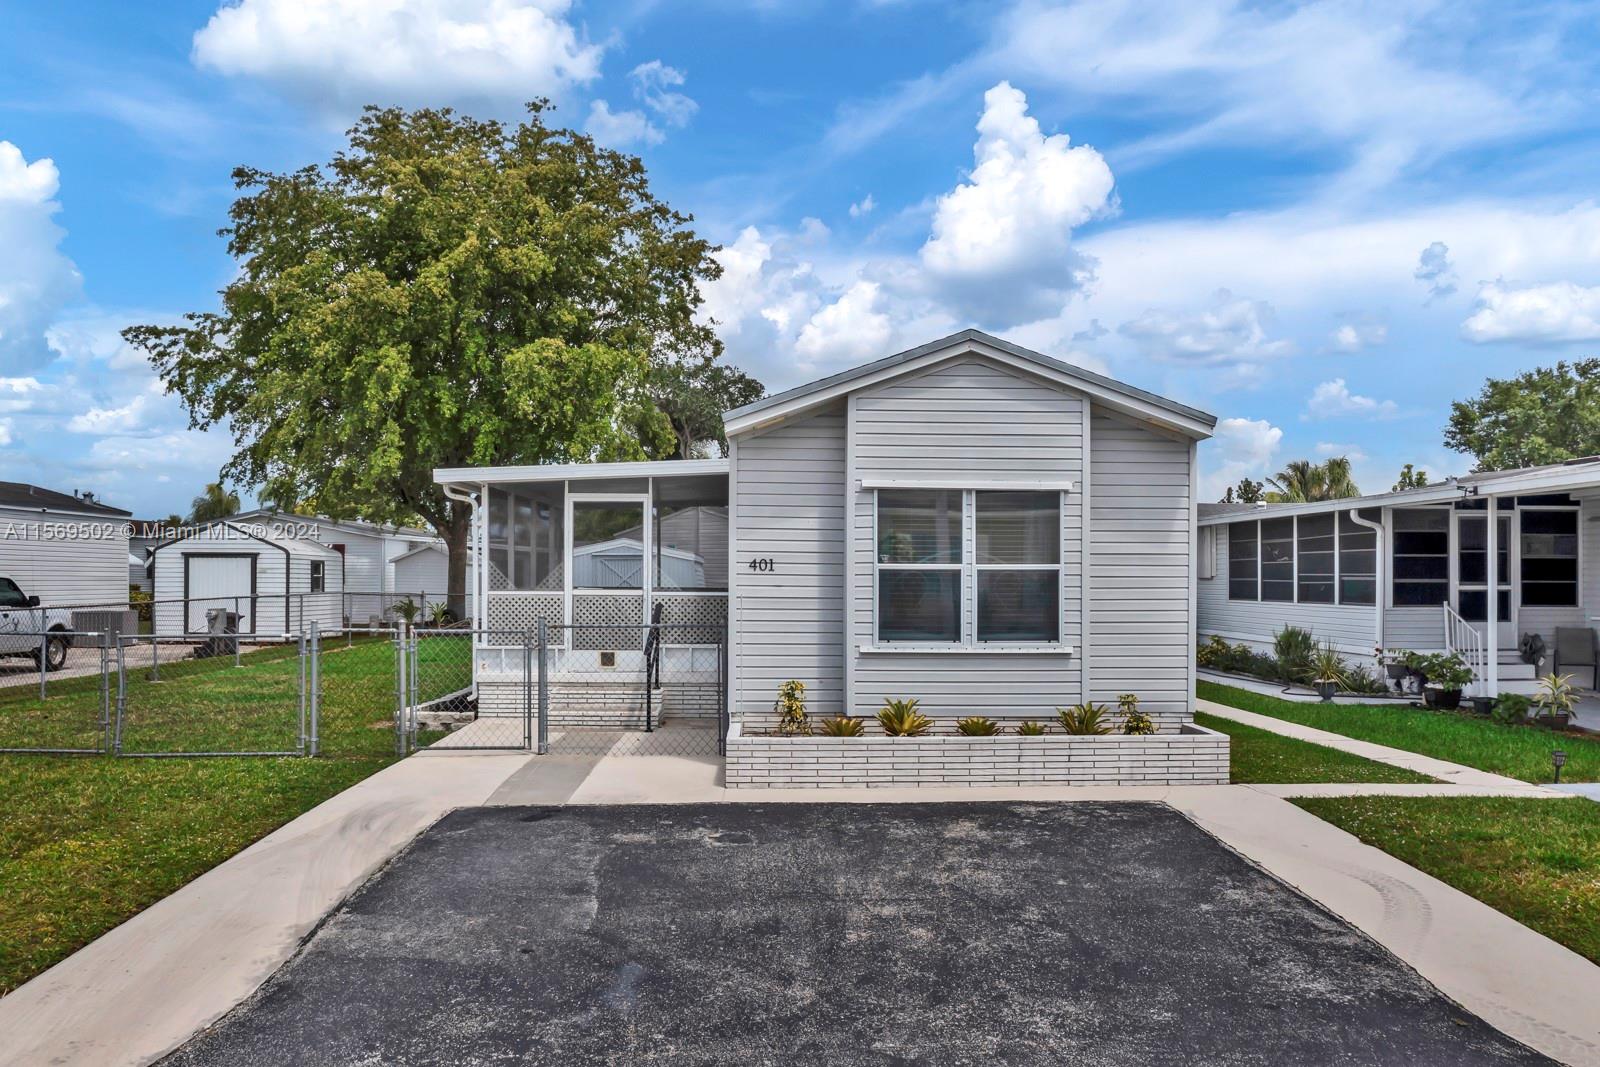 Welcome Home! This beautiful move in ready 2/2 manufactured home is located in Gateway West a 55+ community that you own the land. Property features tile flooring in main living area, wood flooring in bedrooms, split floor plan, new A/C and appliances in 2023, fully fenced yard and low HOA fees.  Community offers a clubhouse, pool and R/V or boat storage area for a low yearly fee. A Must See!